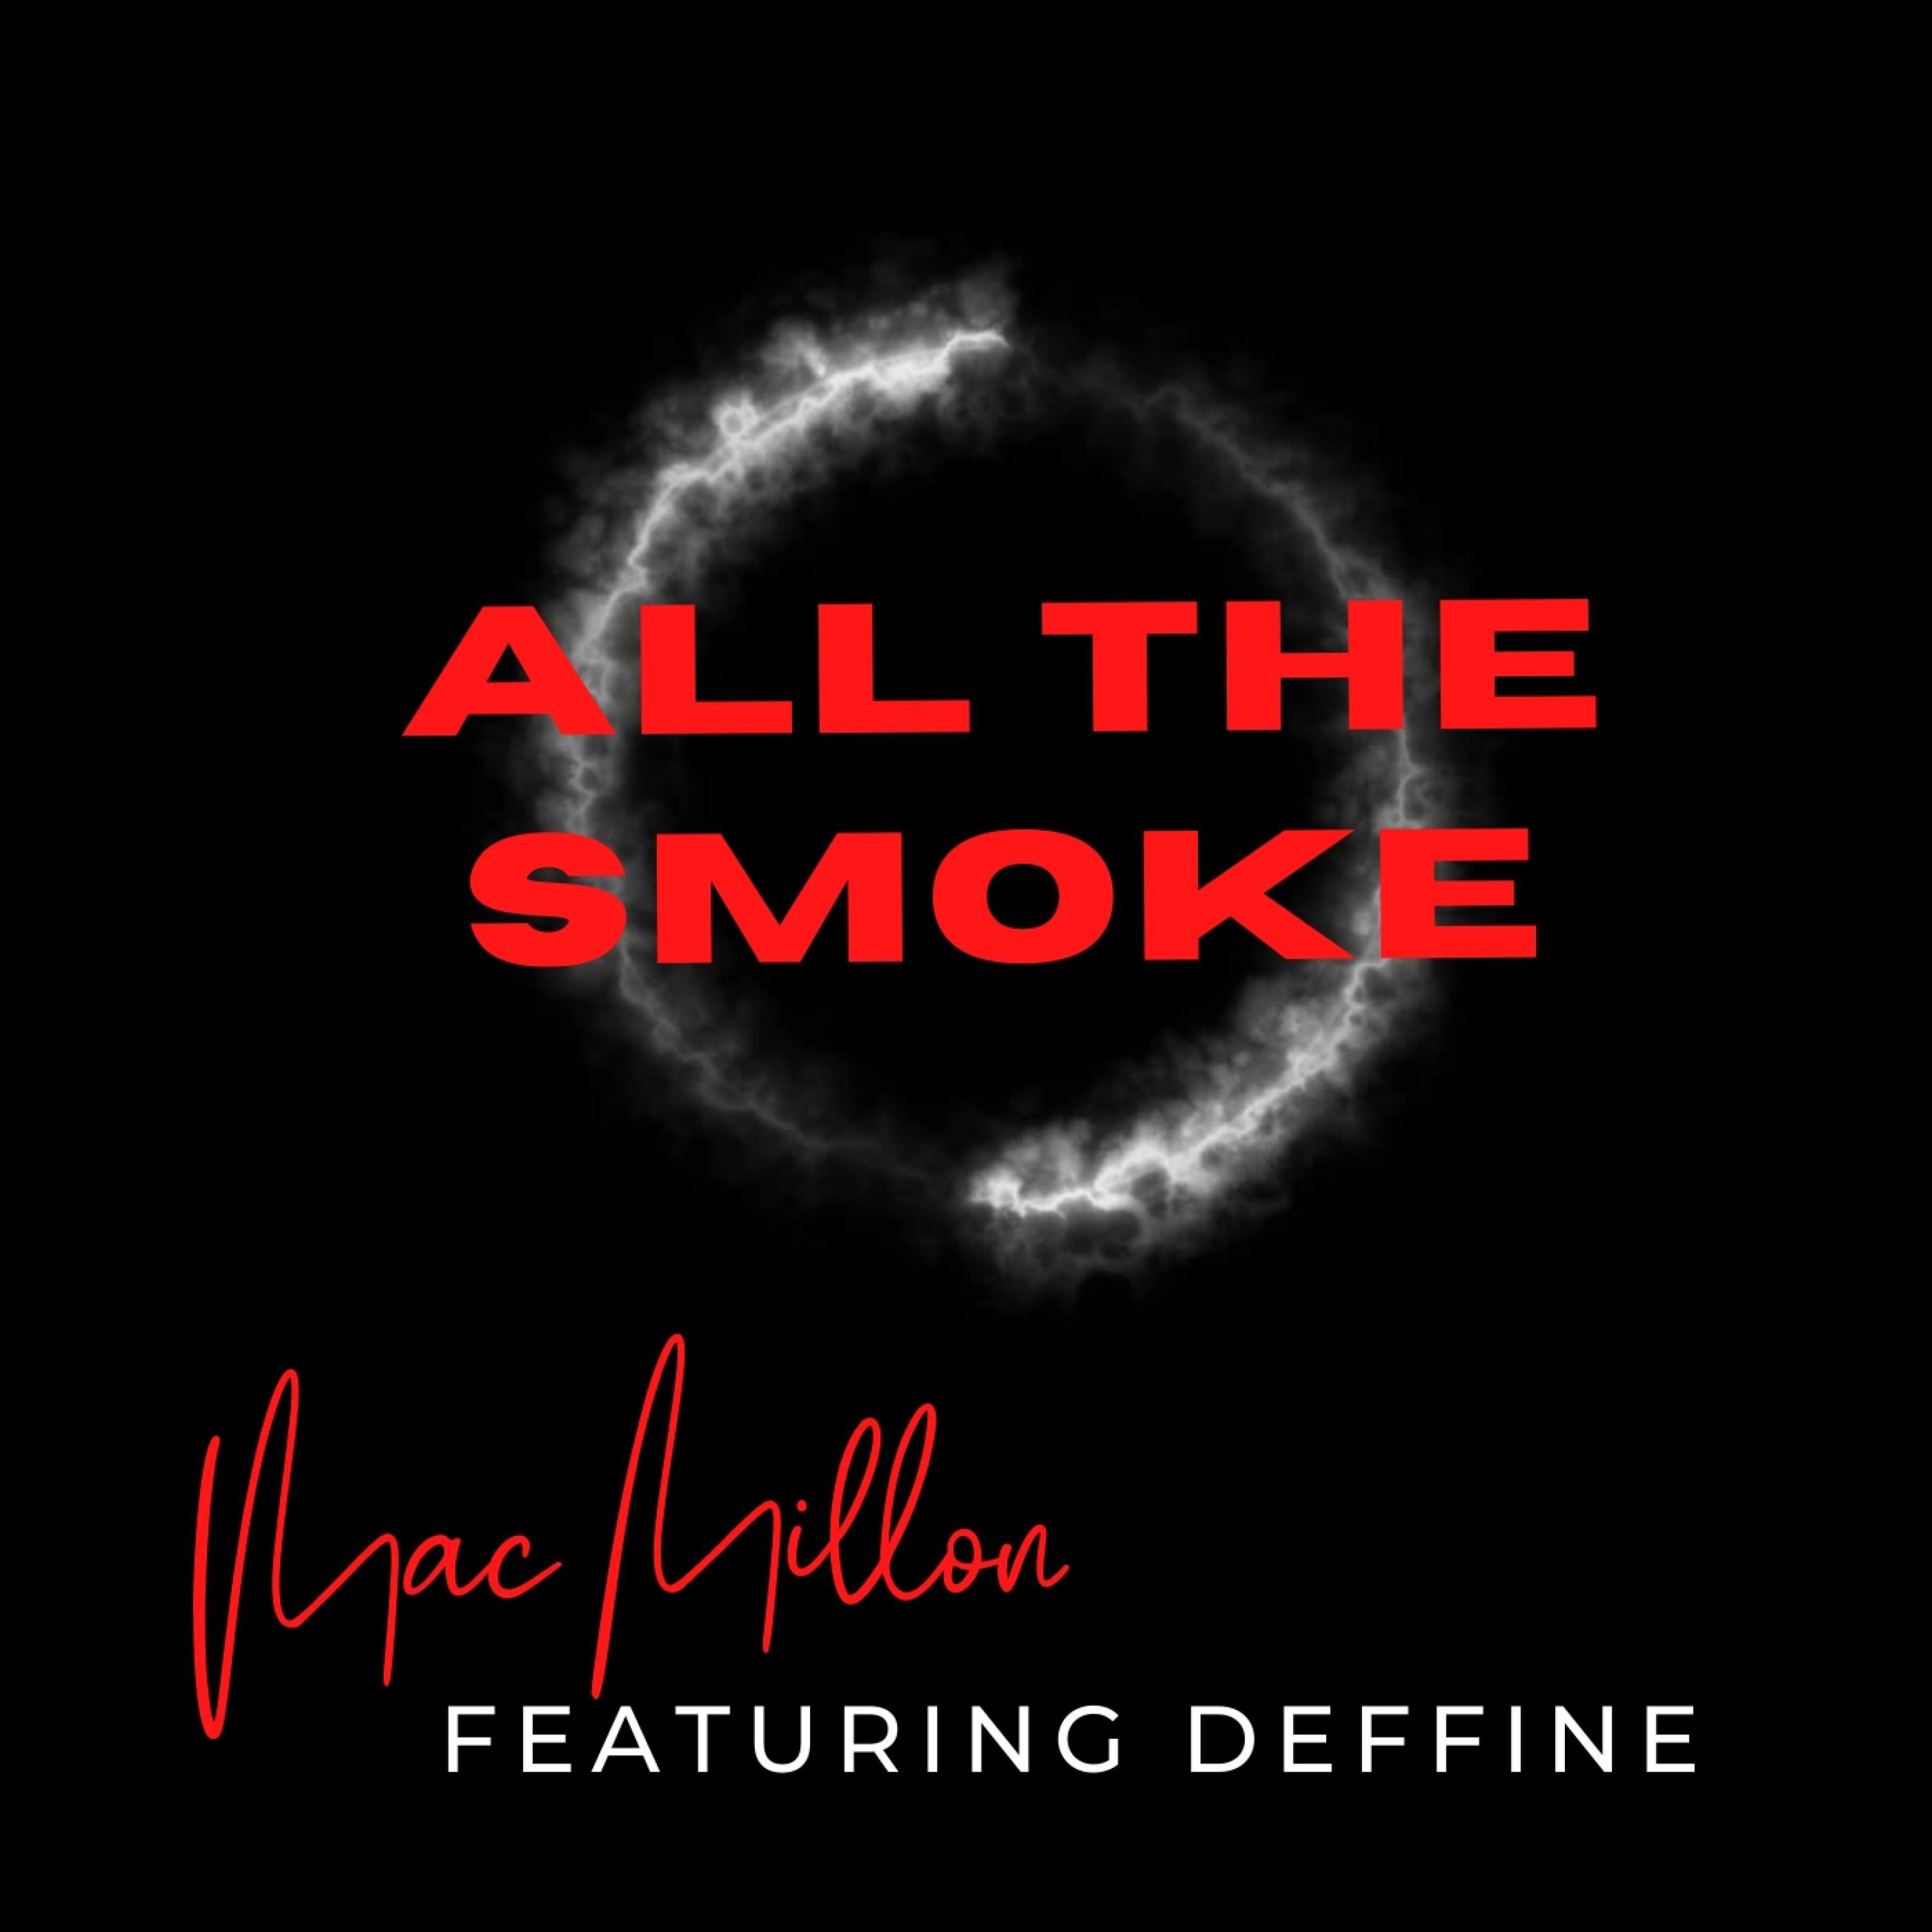 Mac Millon - All The Smoke (Gee Wunder Diss) (feat. Deffine)